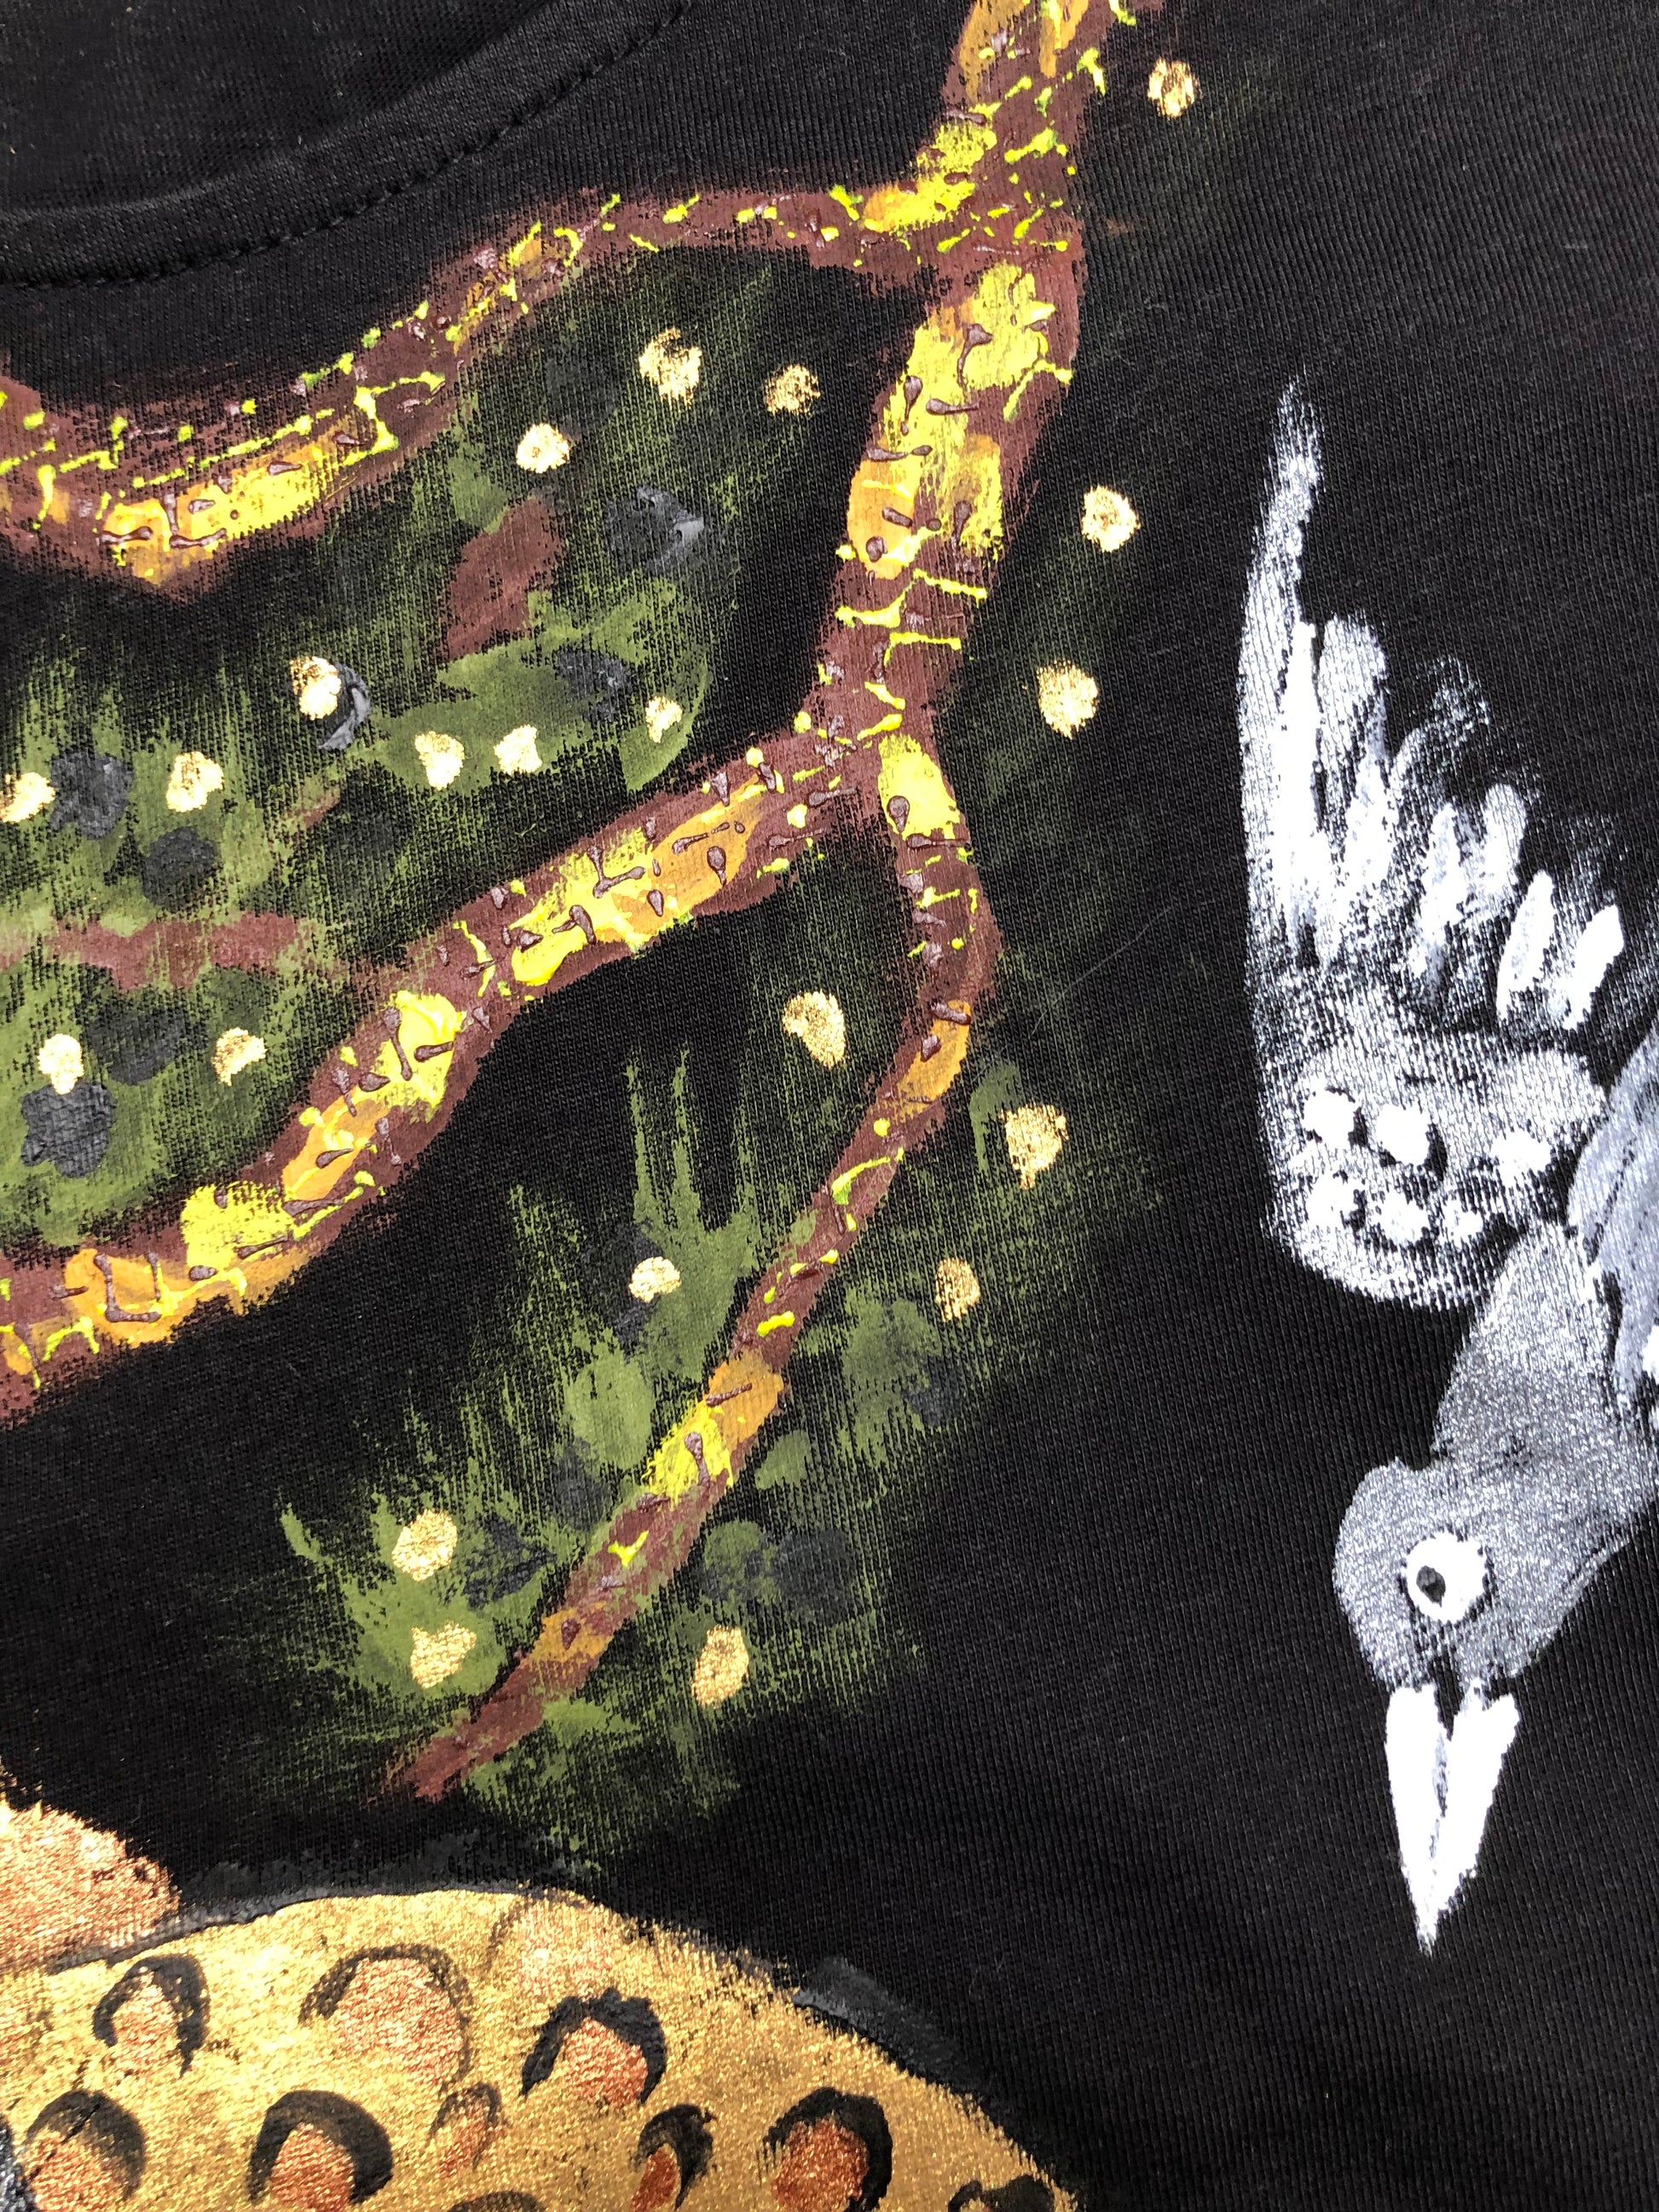 Detail tree and bird on a T-shirt